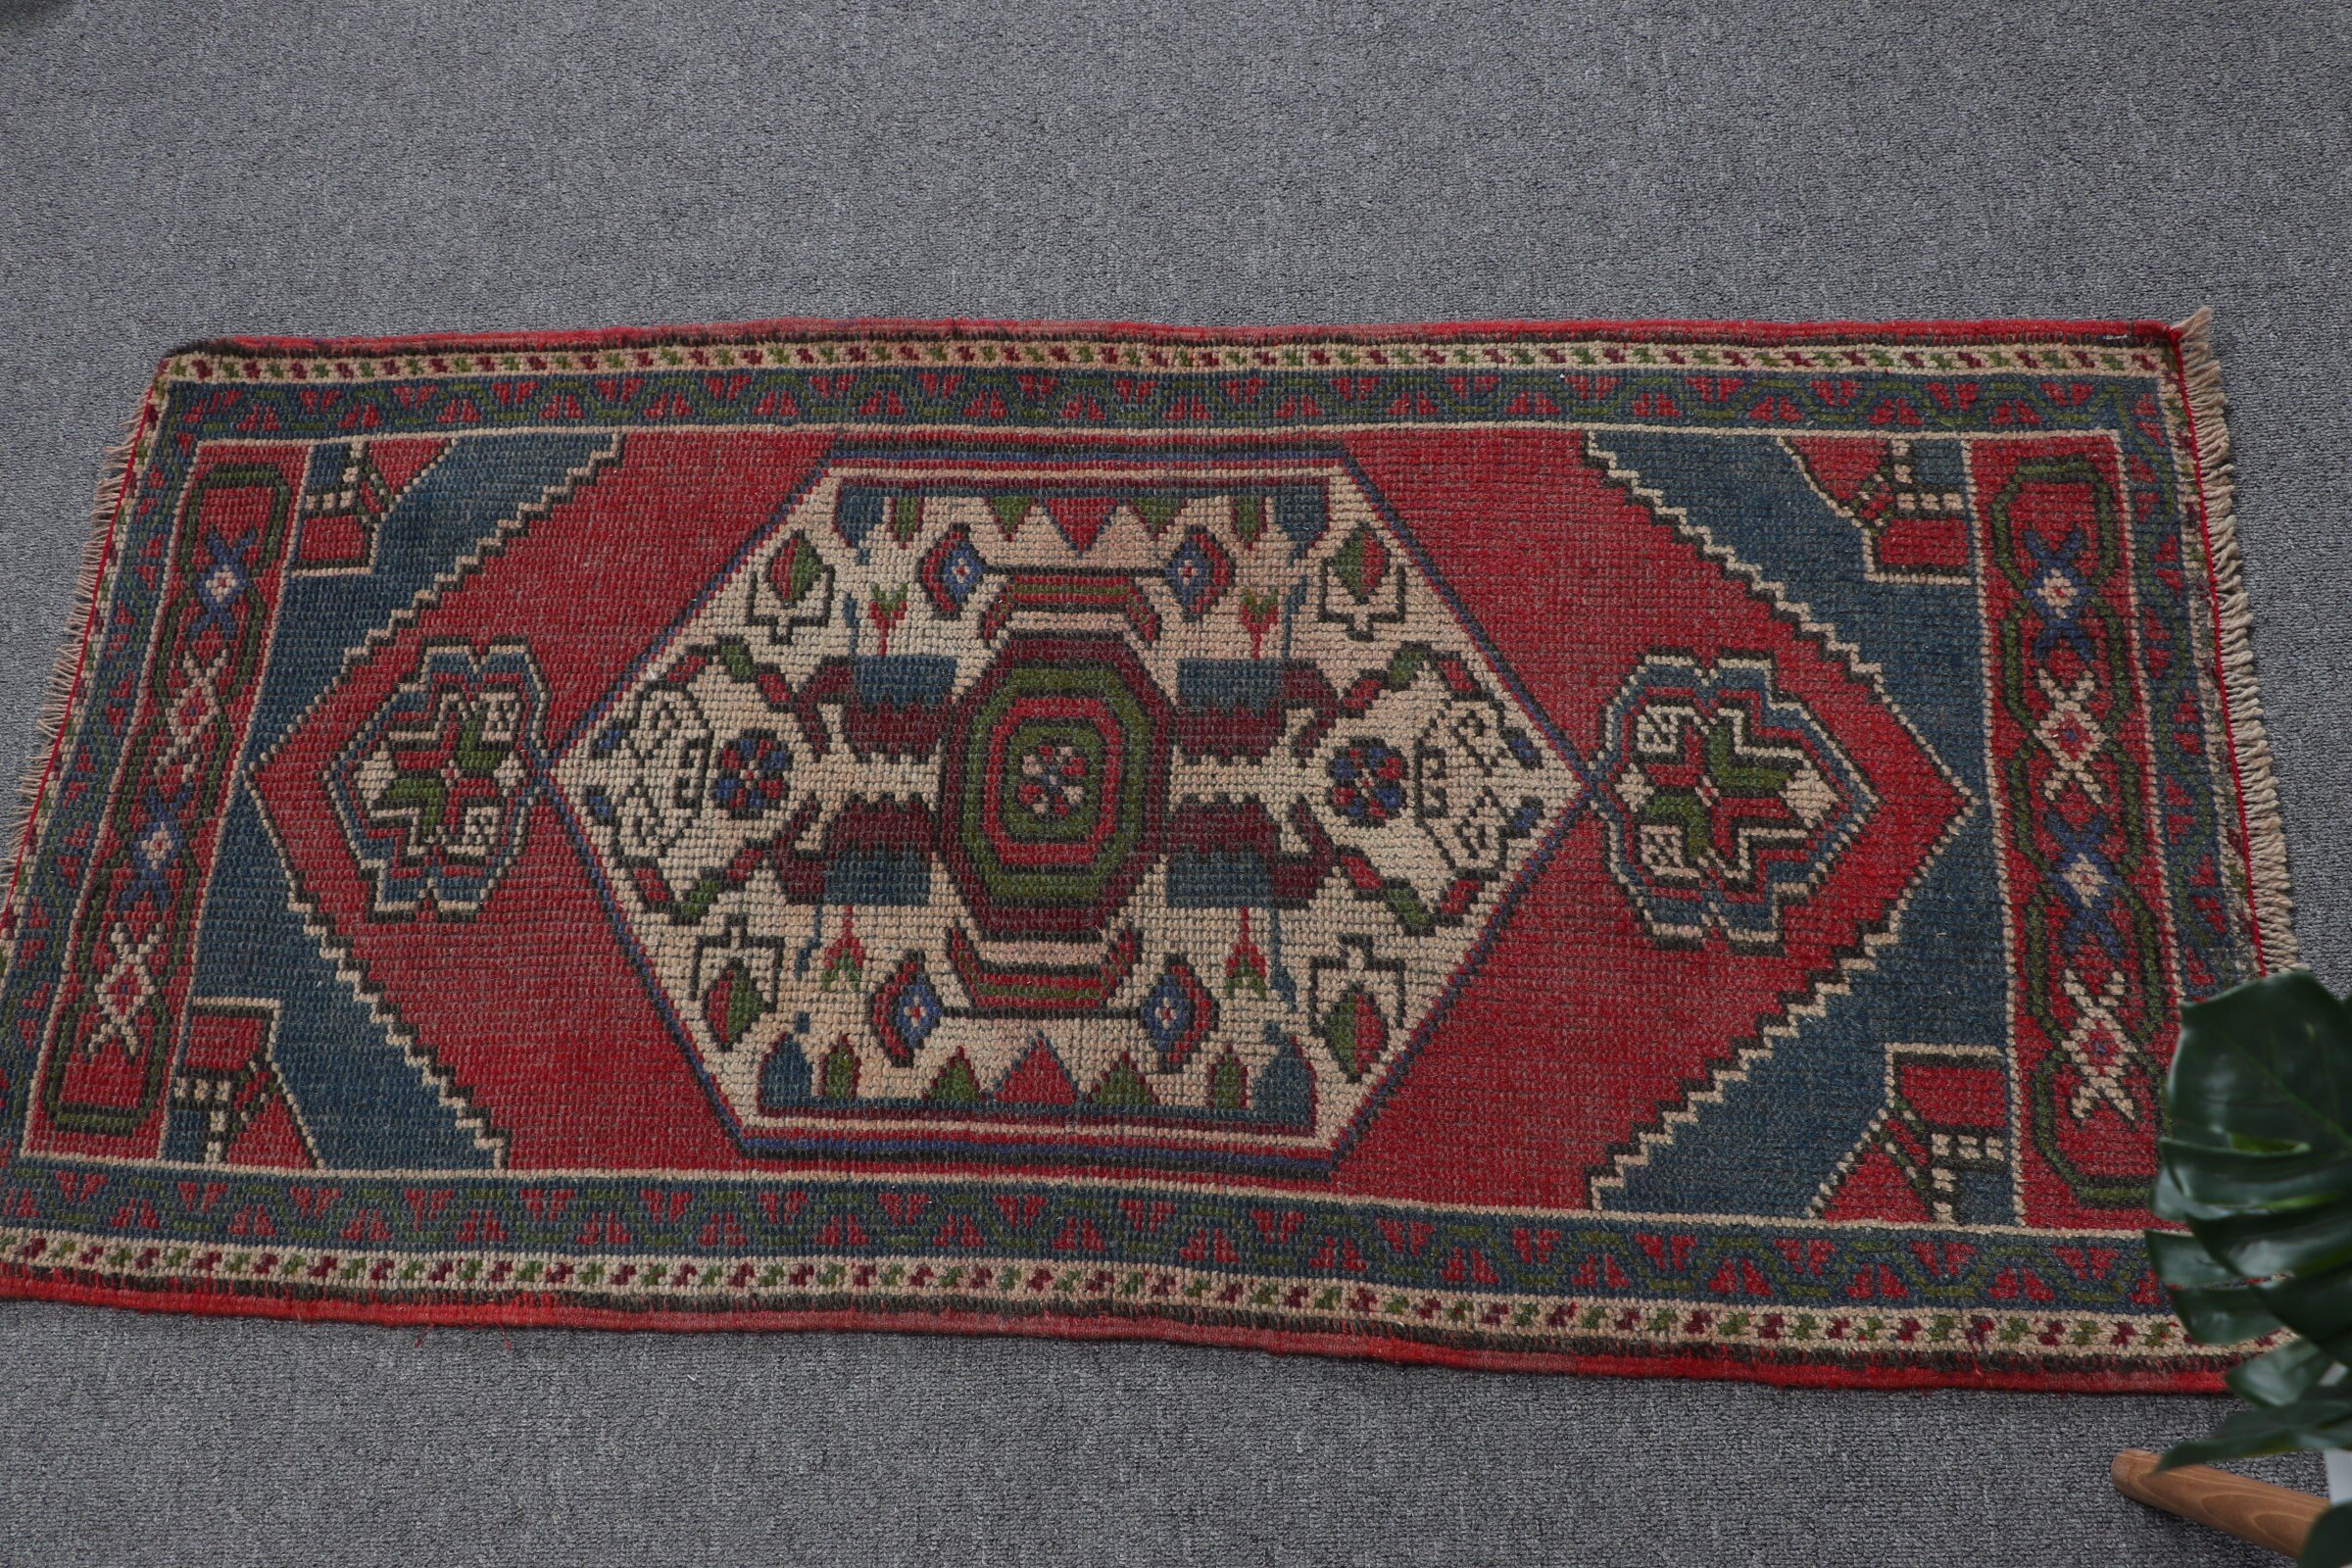 Red Anatolian Rug, Car Mat Rug, Cool Rugs, Vintage Rug, Rugs for Nursery, Turkish Rugs, Entry Rug, 2x3.9 ft Small Rug, Oriental Rugs